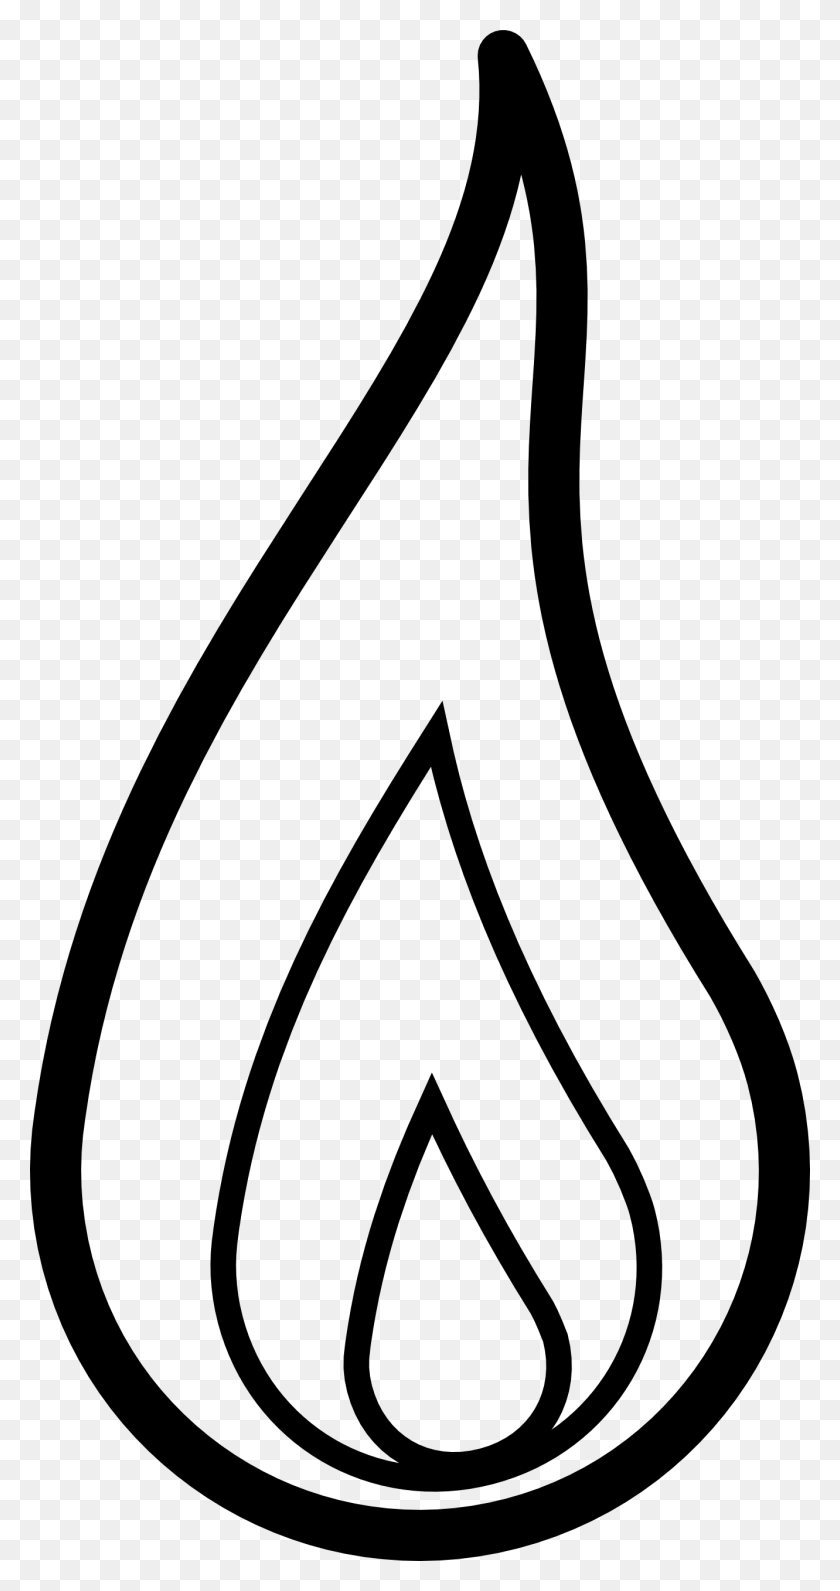 1331x2613 Fire Flames Clipart Black And White - Slavery Clipart